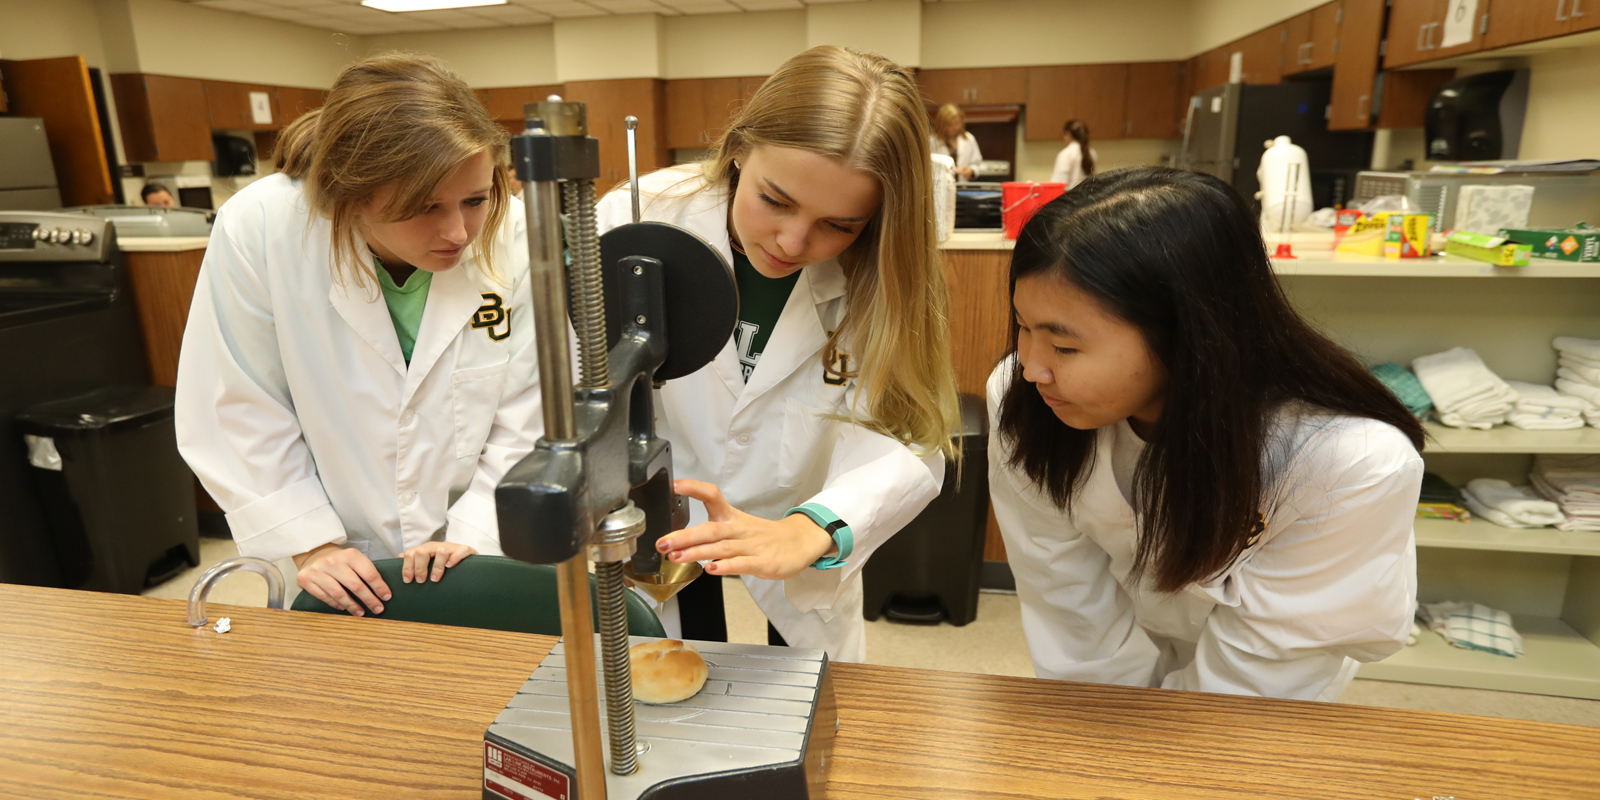 Students in laboratory study together